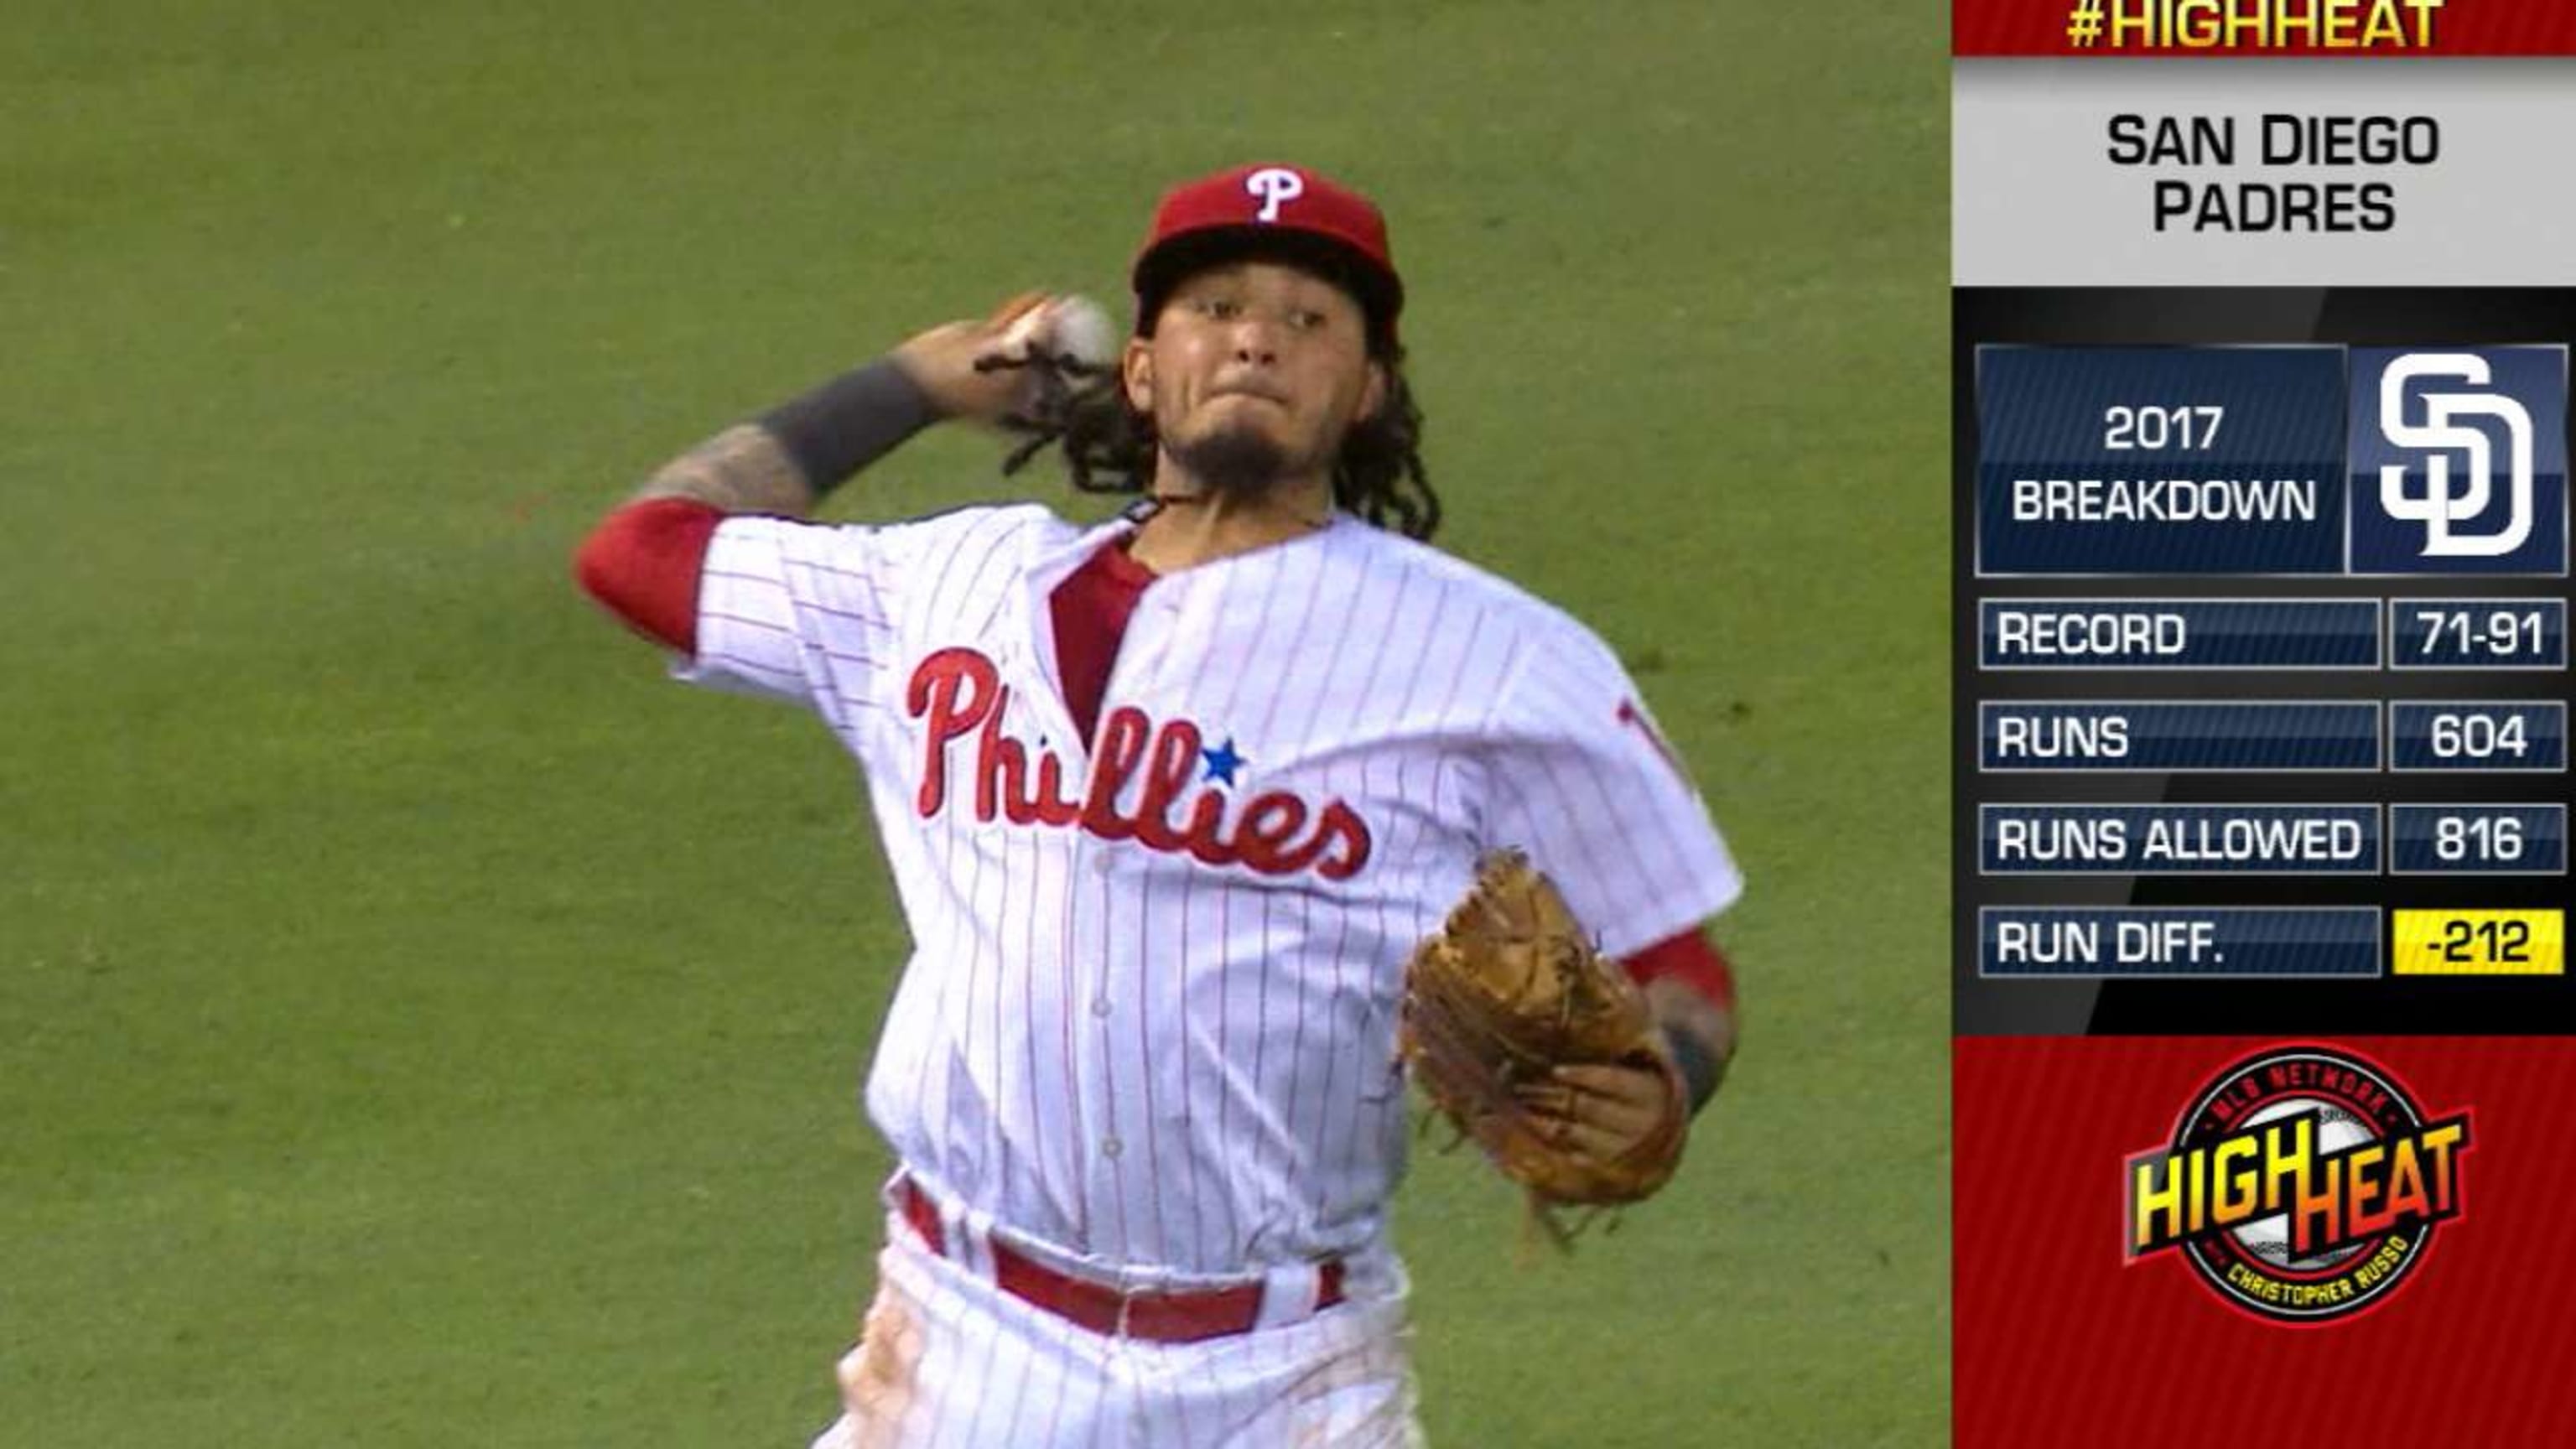 San Diego Padres acquire Freddy Galvis from Philadelphia Phillies 